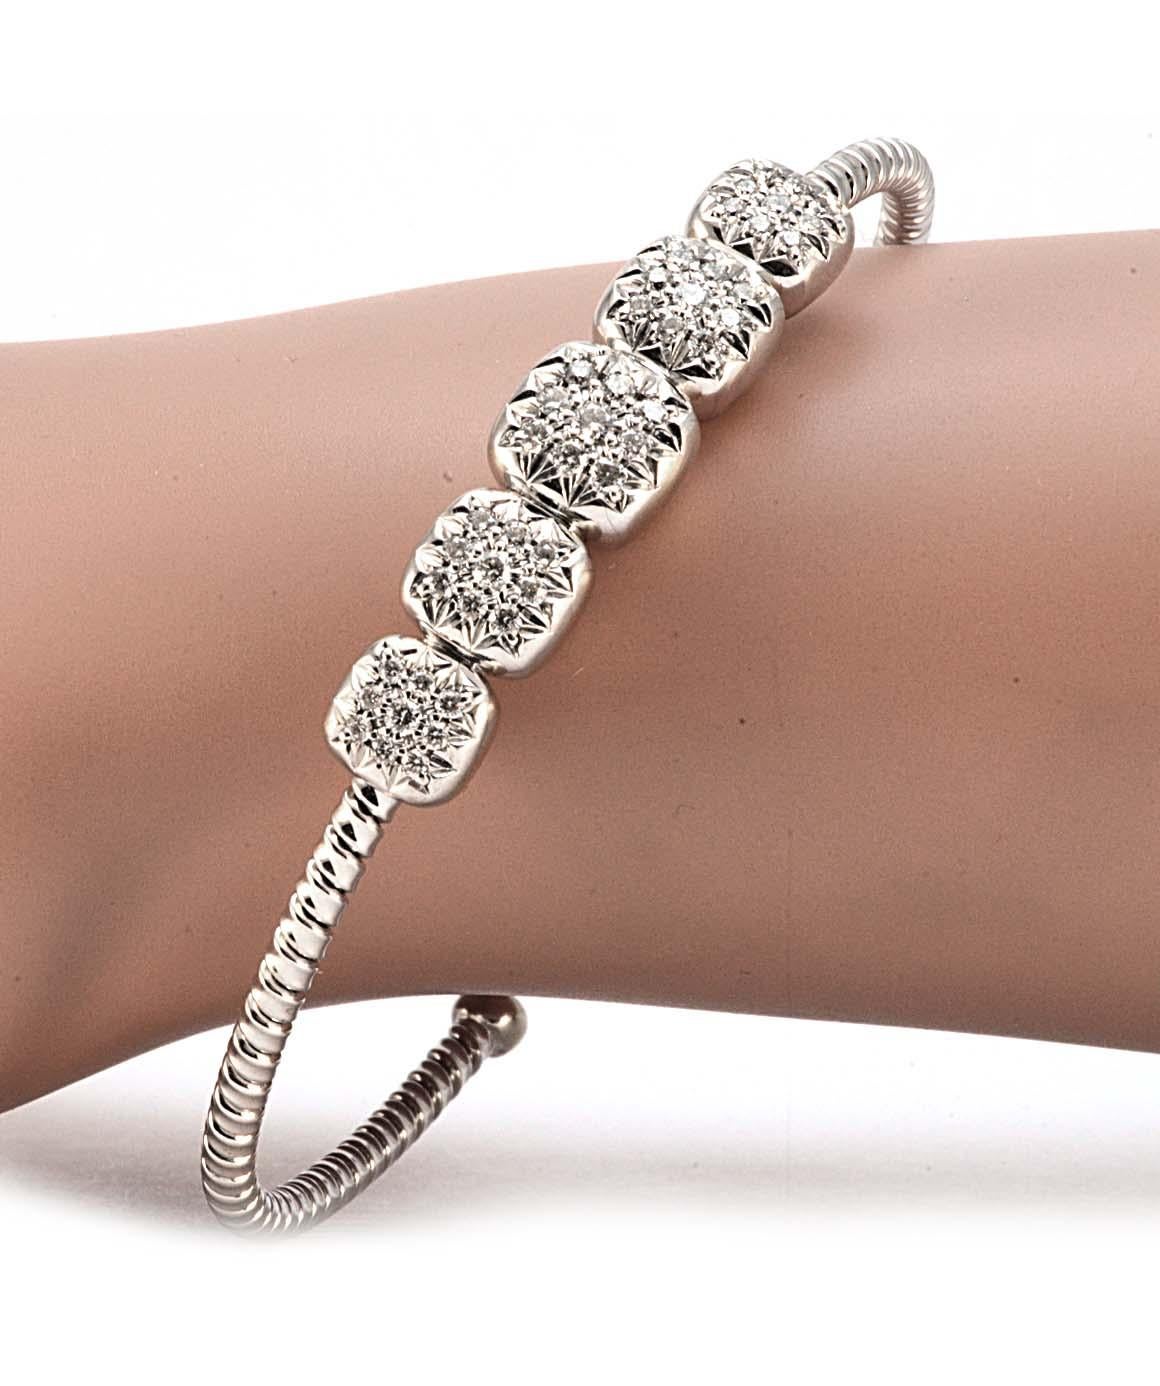 Excellent condition. This solid 18K white gold cuff bracelet features 5 cushion clusters that contain 9 genuine round diamonds each (45 diamonds total). The cuff portion of this bracelet has a cable style. The bracelet measures 2.50 inches X 2.10